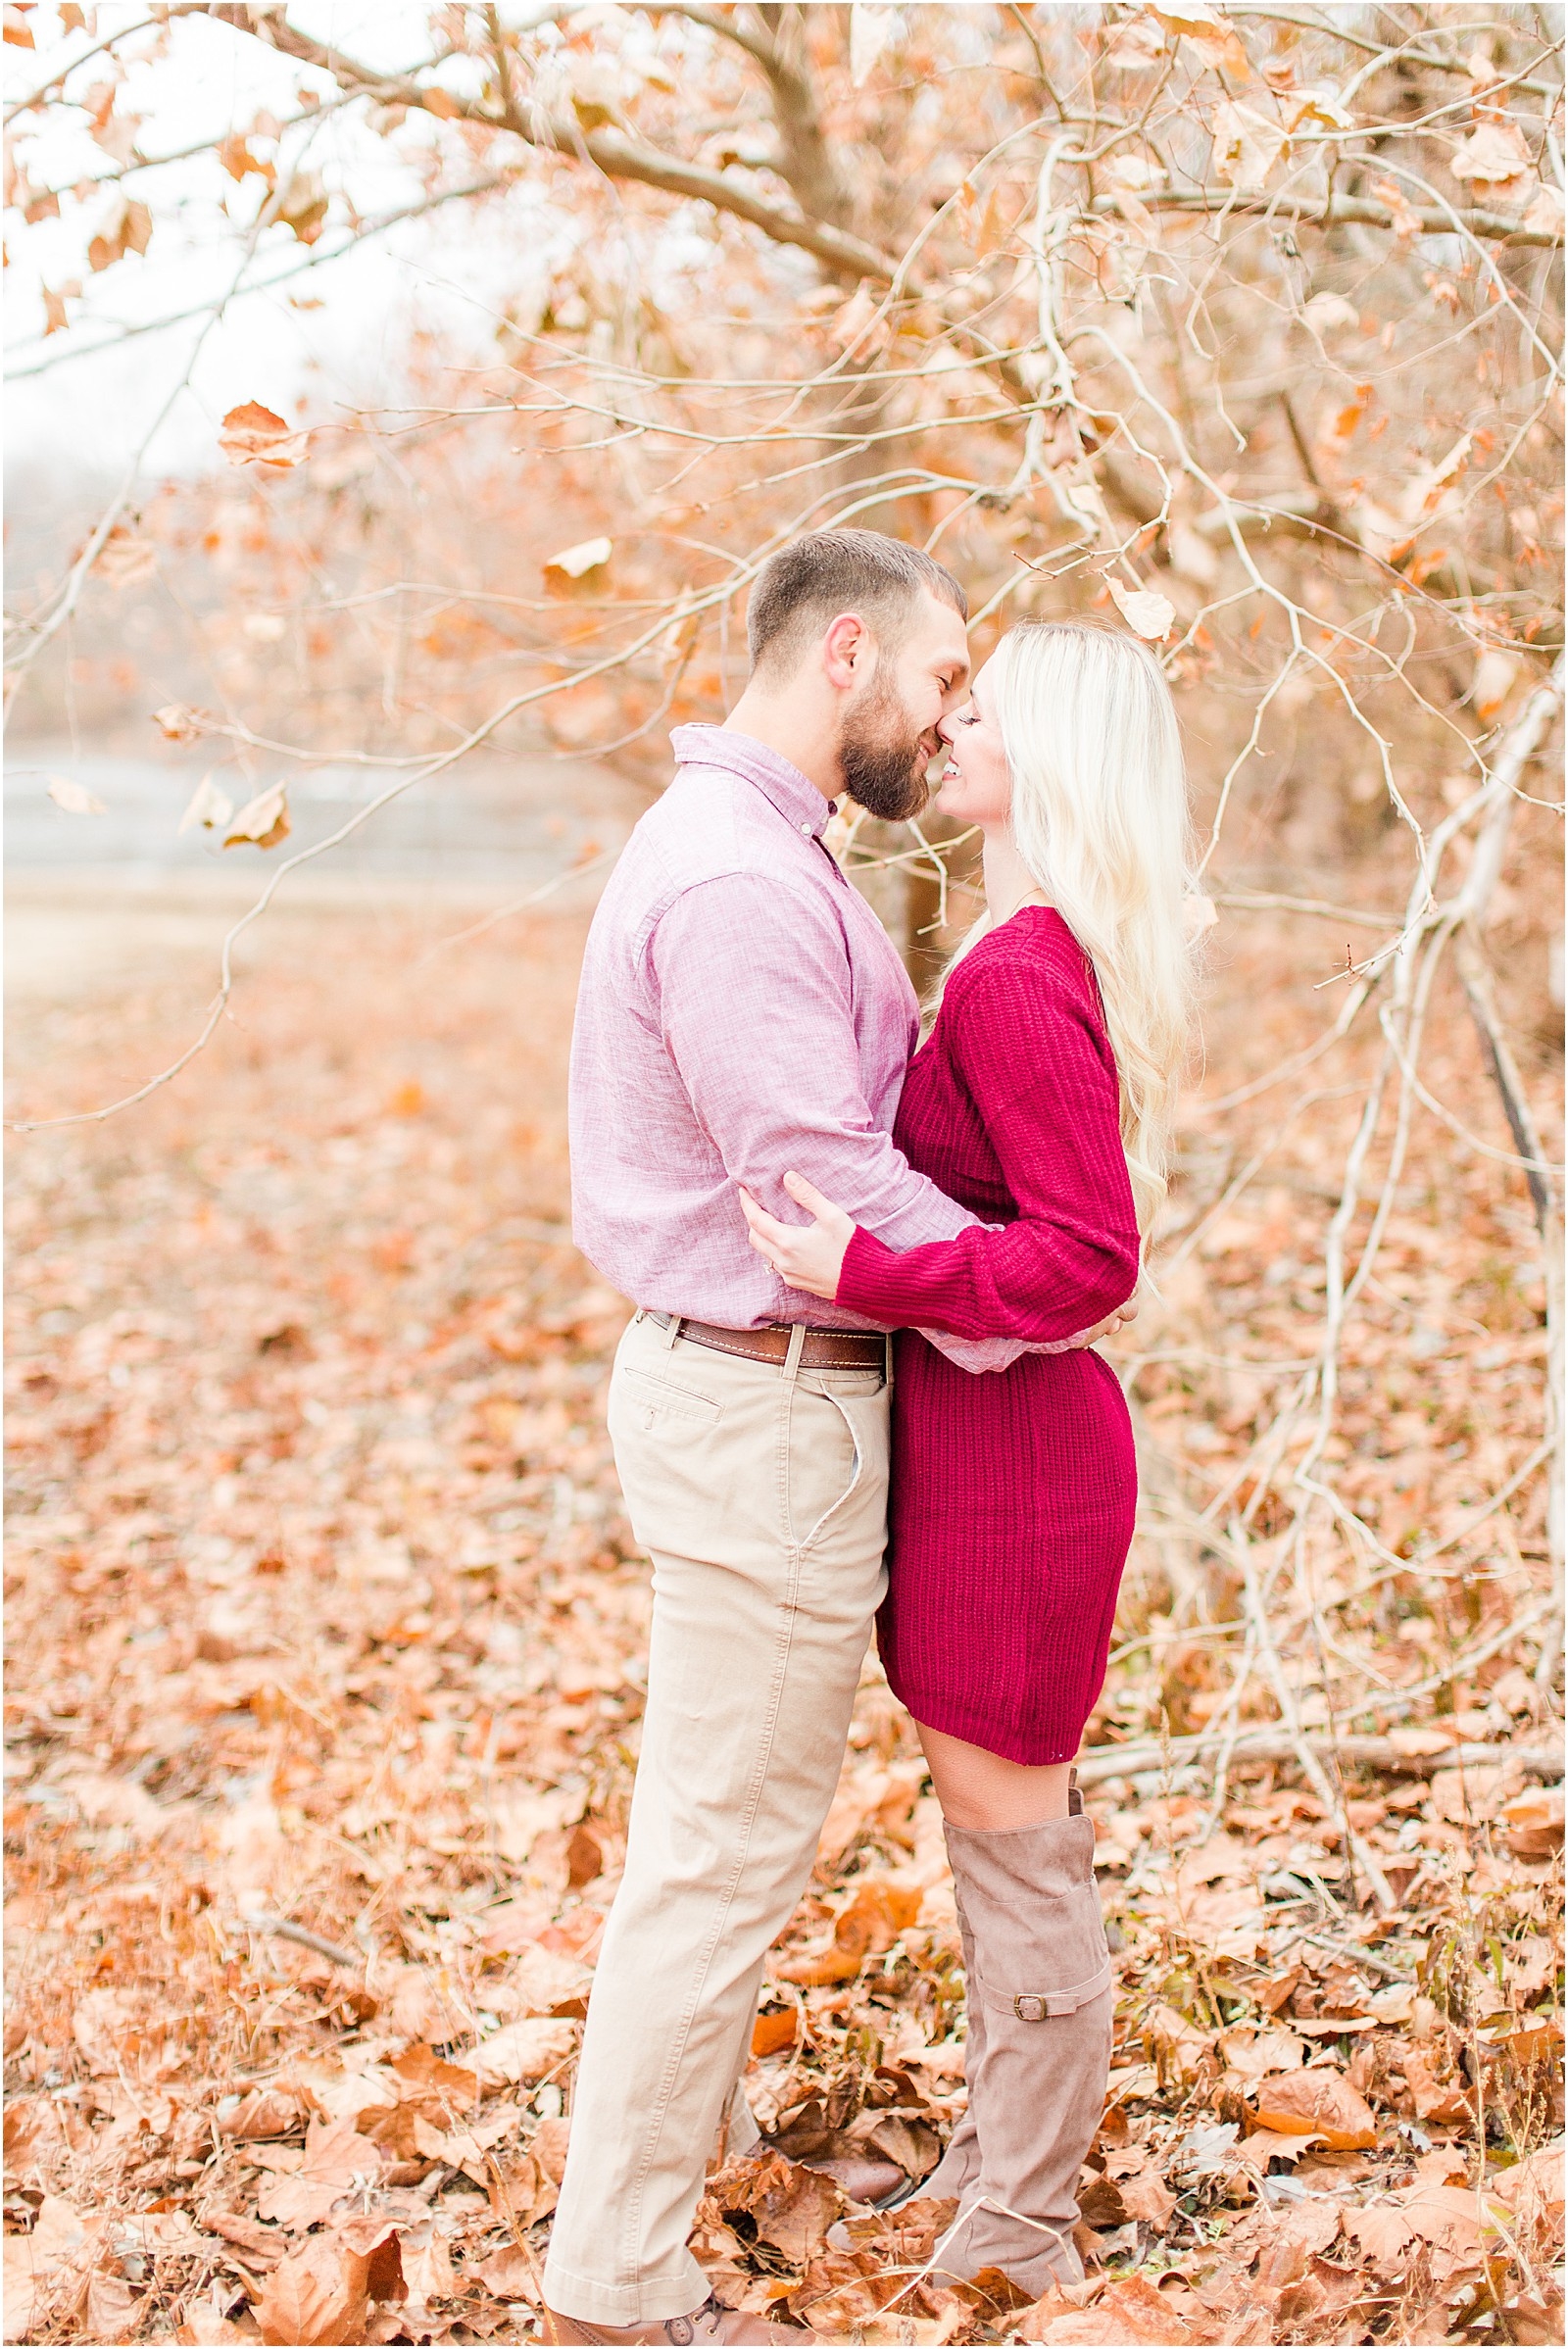 An sweet and snuggly fall anniversary session in Loogootee, Indiana. | #anniversarysession #fallsession #southernindianawedding | 018.jpg